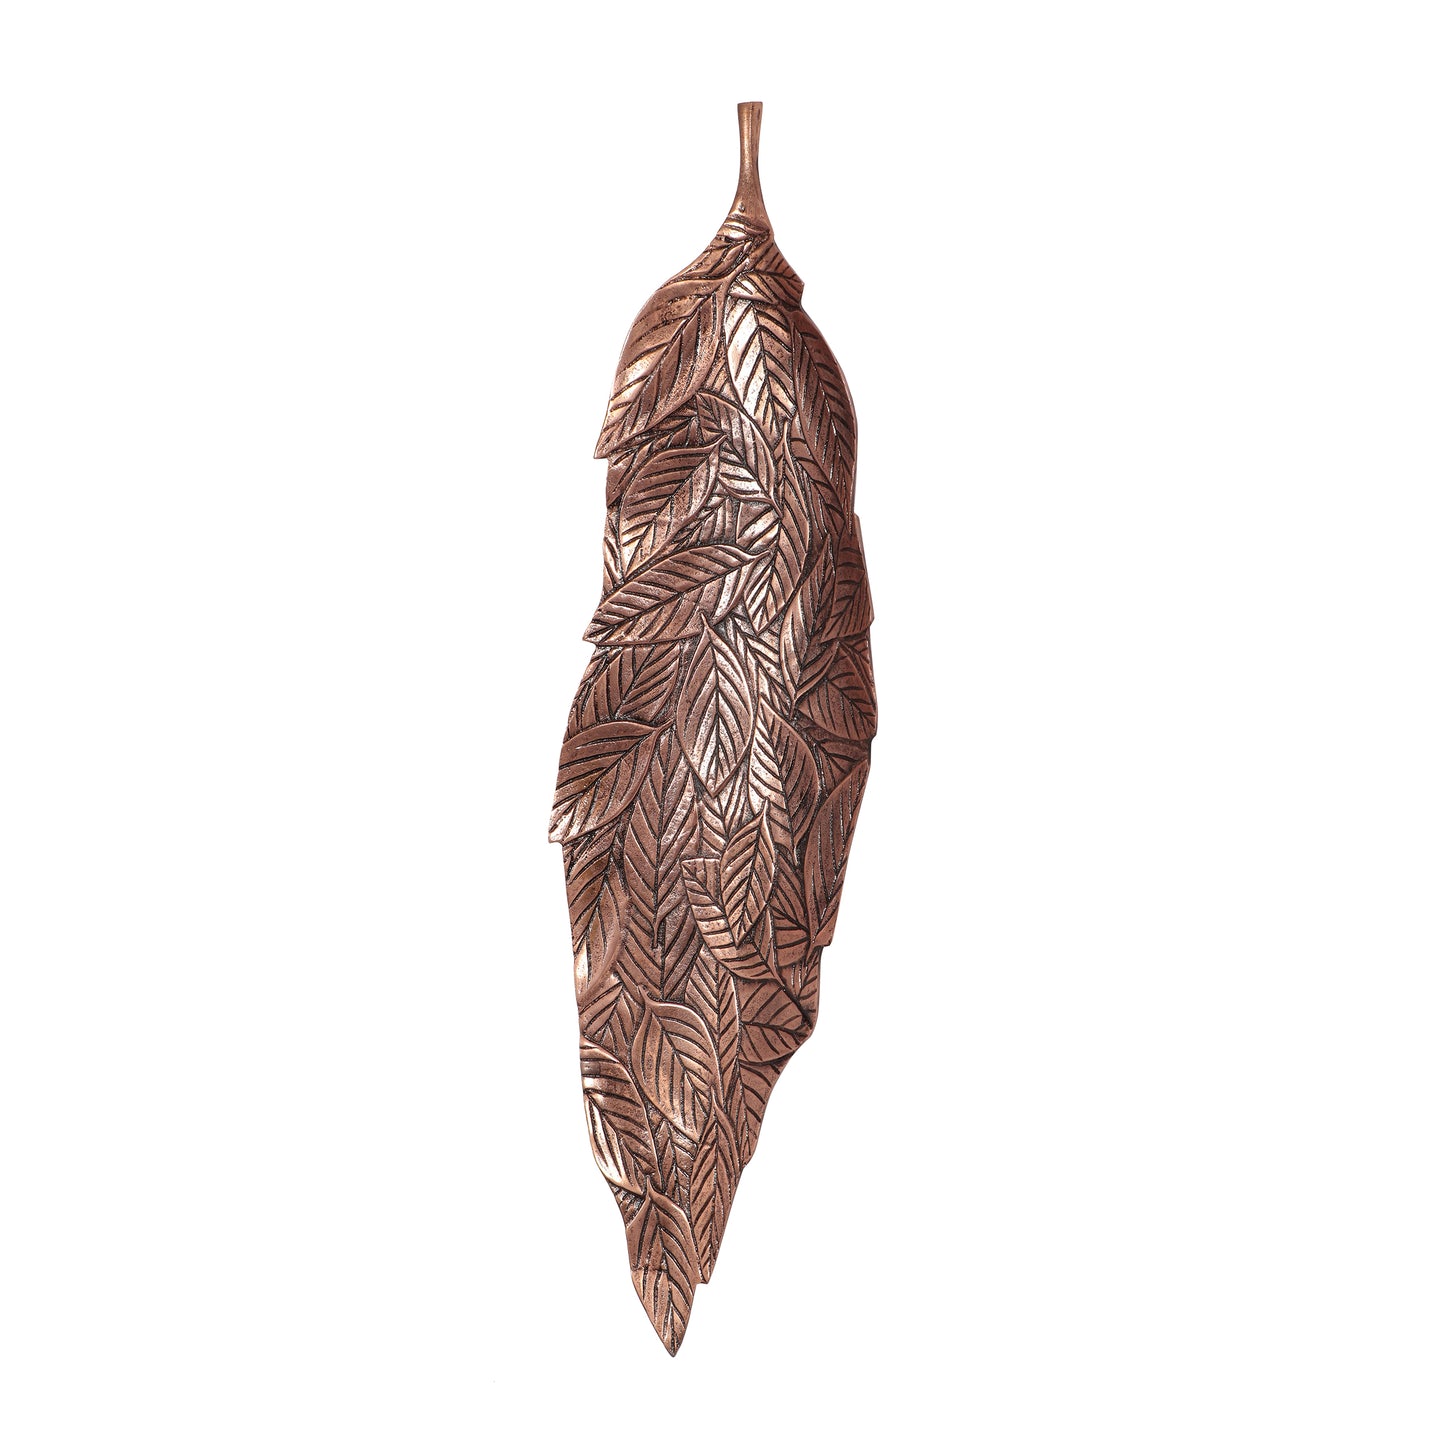 Ailey Handcrafted Aluminum Leaf Wall Decor